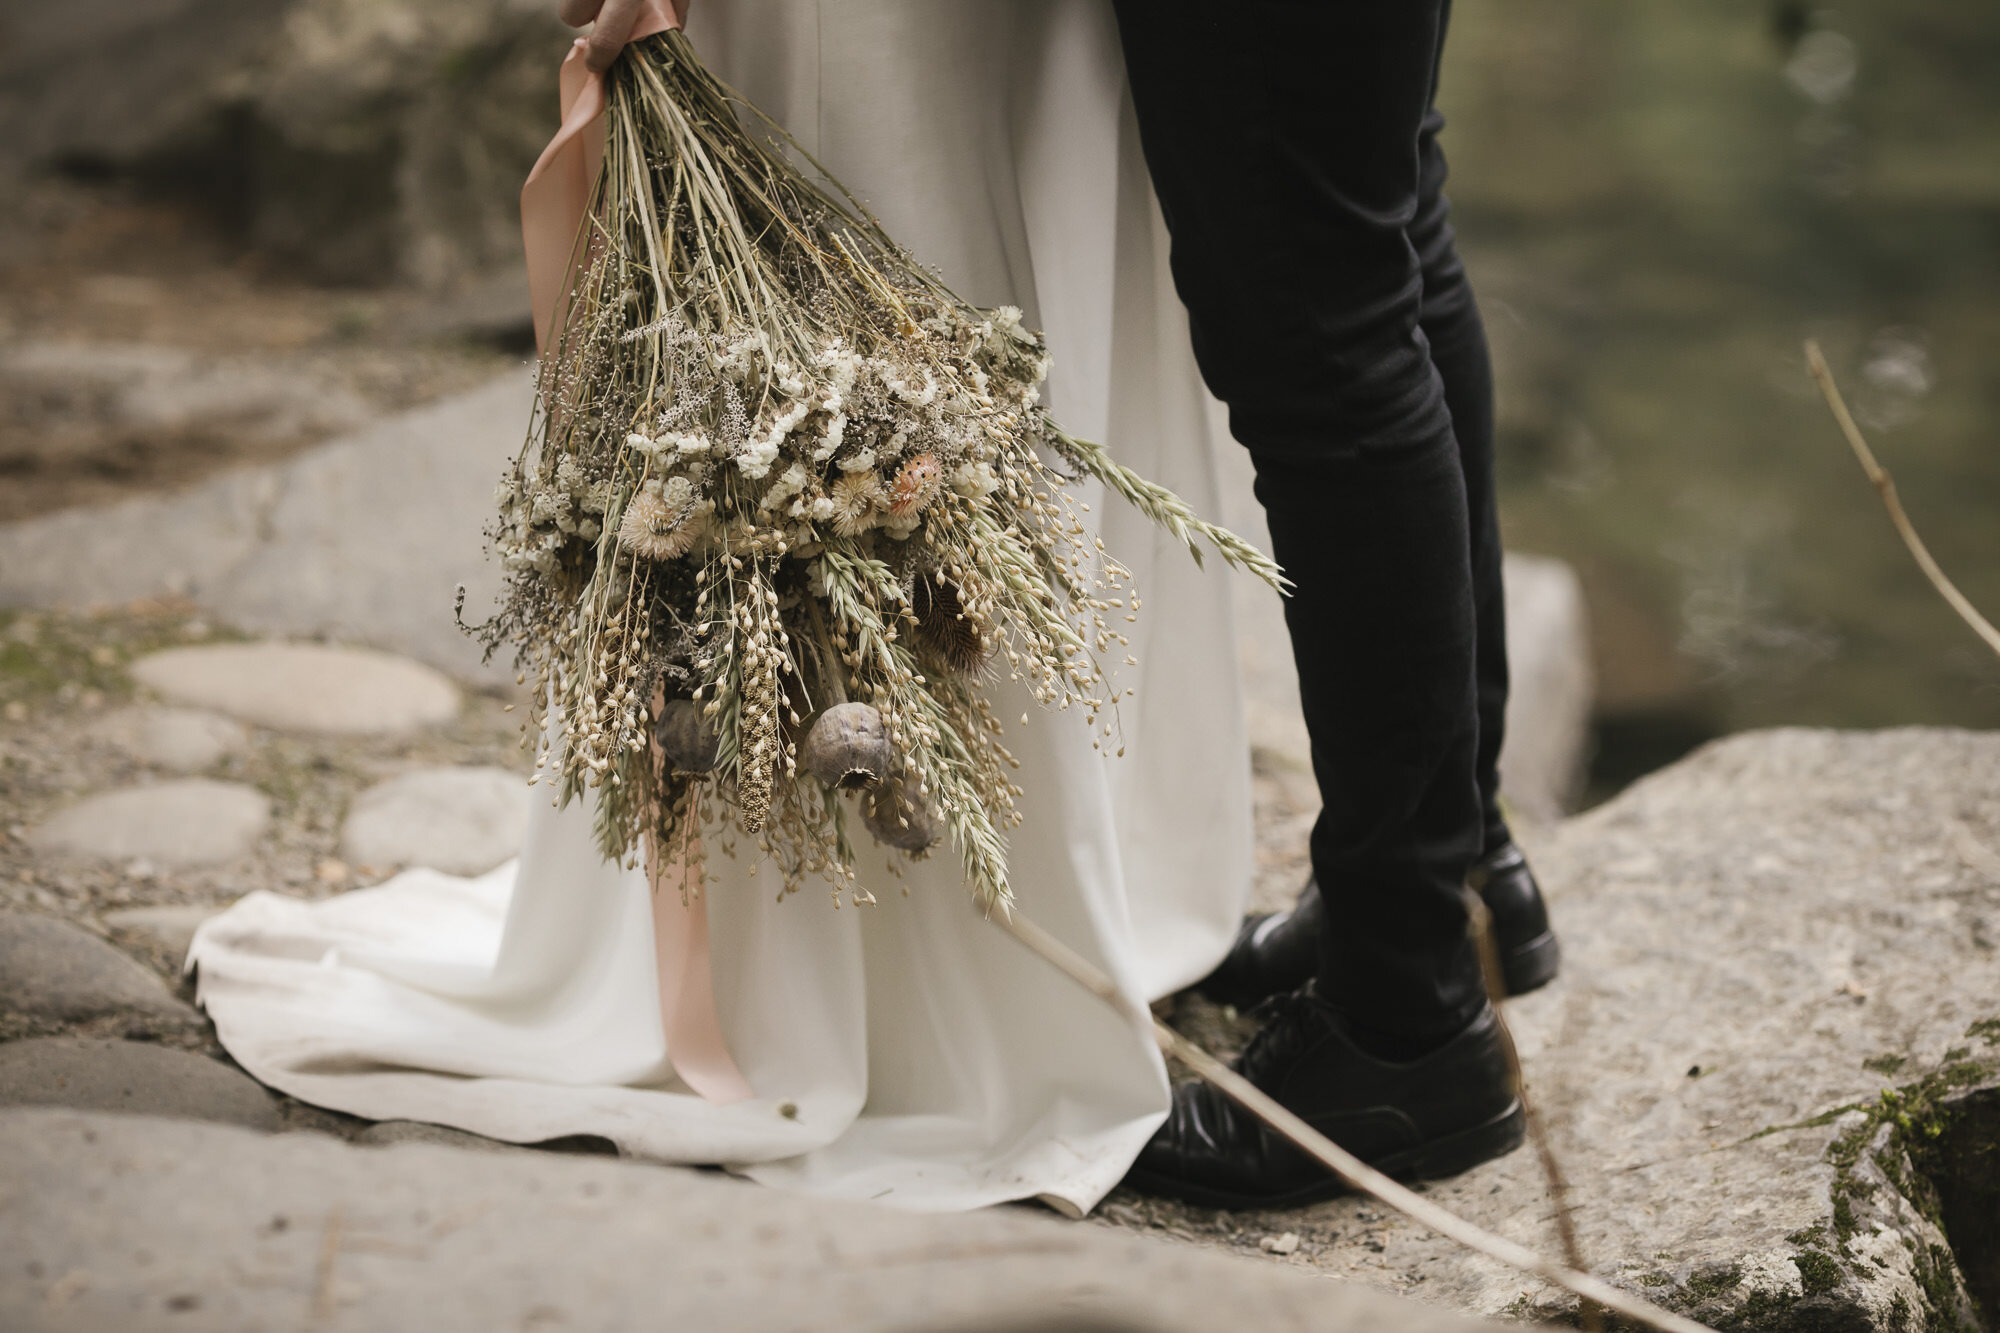 Bride's bouquet of dried flowers with her partner on their wedding day